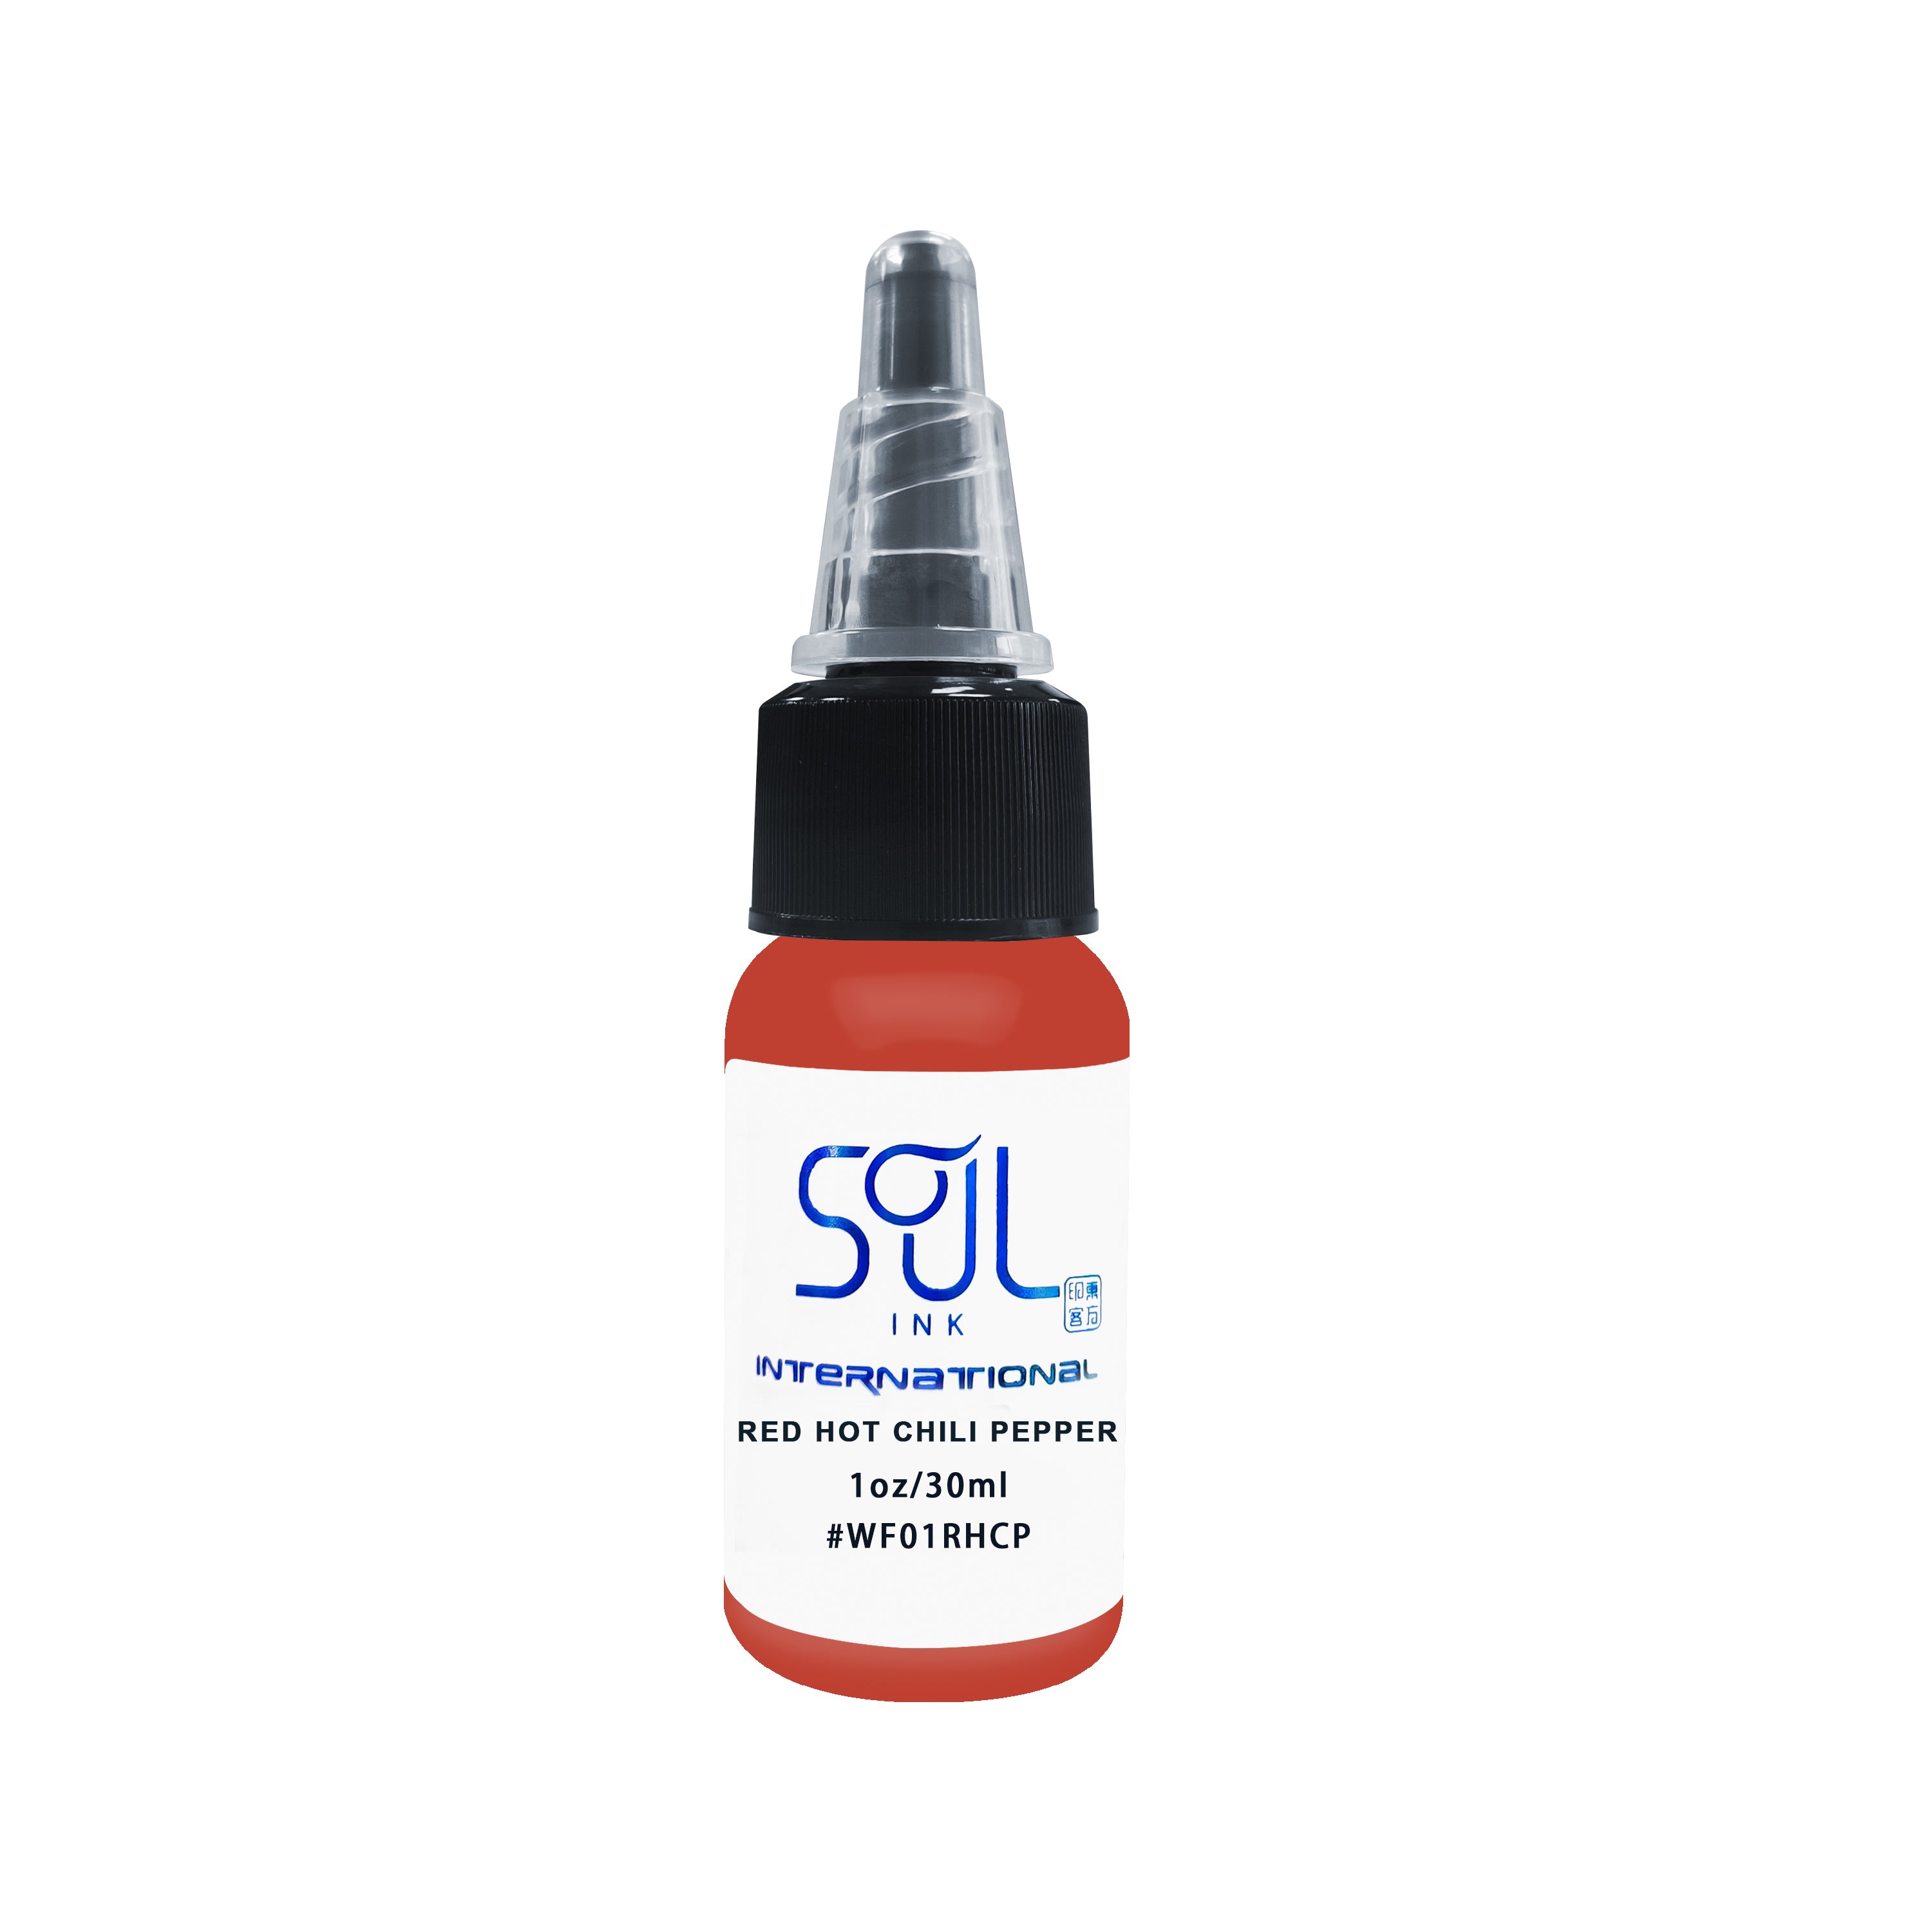 Photograph of a bottle of 'Soul Ink' brand red hot chilli pepper ink. The label prominently displays the brand name 'Soul Ink' in stylish blue typography against a white background. The red hot chilli pepper 30 ml bottle with a white label featuring the brands name 'Soul Ink'.